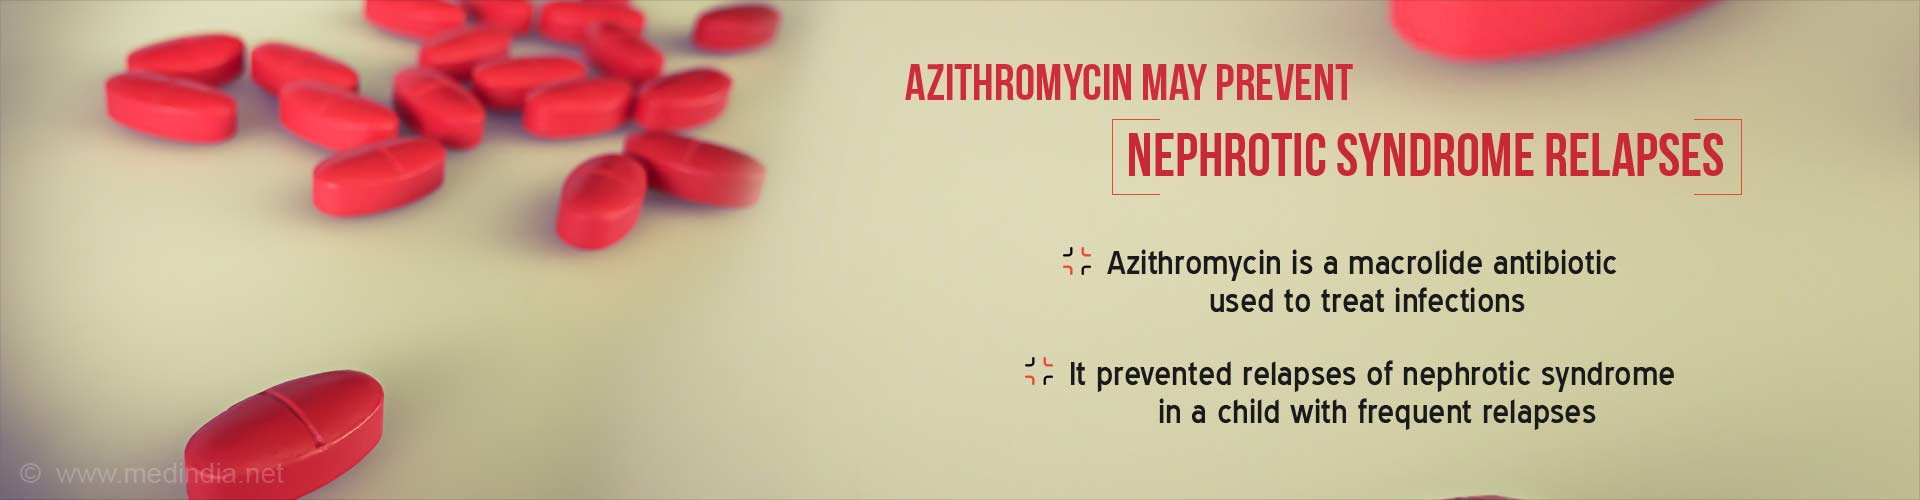 Azithromycin may prevent nephrotic syndrome relapses
- Azithromycin is a macrolide antibiotic used to treat infections
- It prevented relapses of nephrotic syndrome in a child with frequent relapses